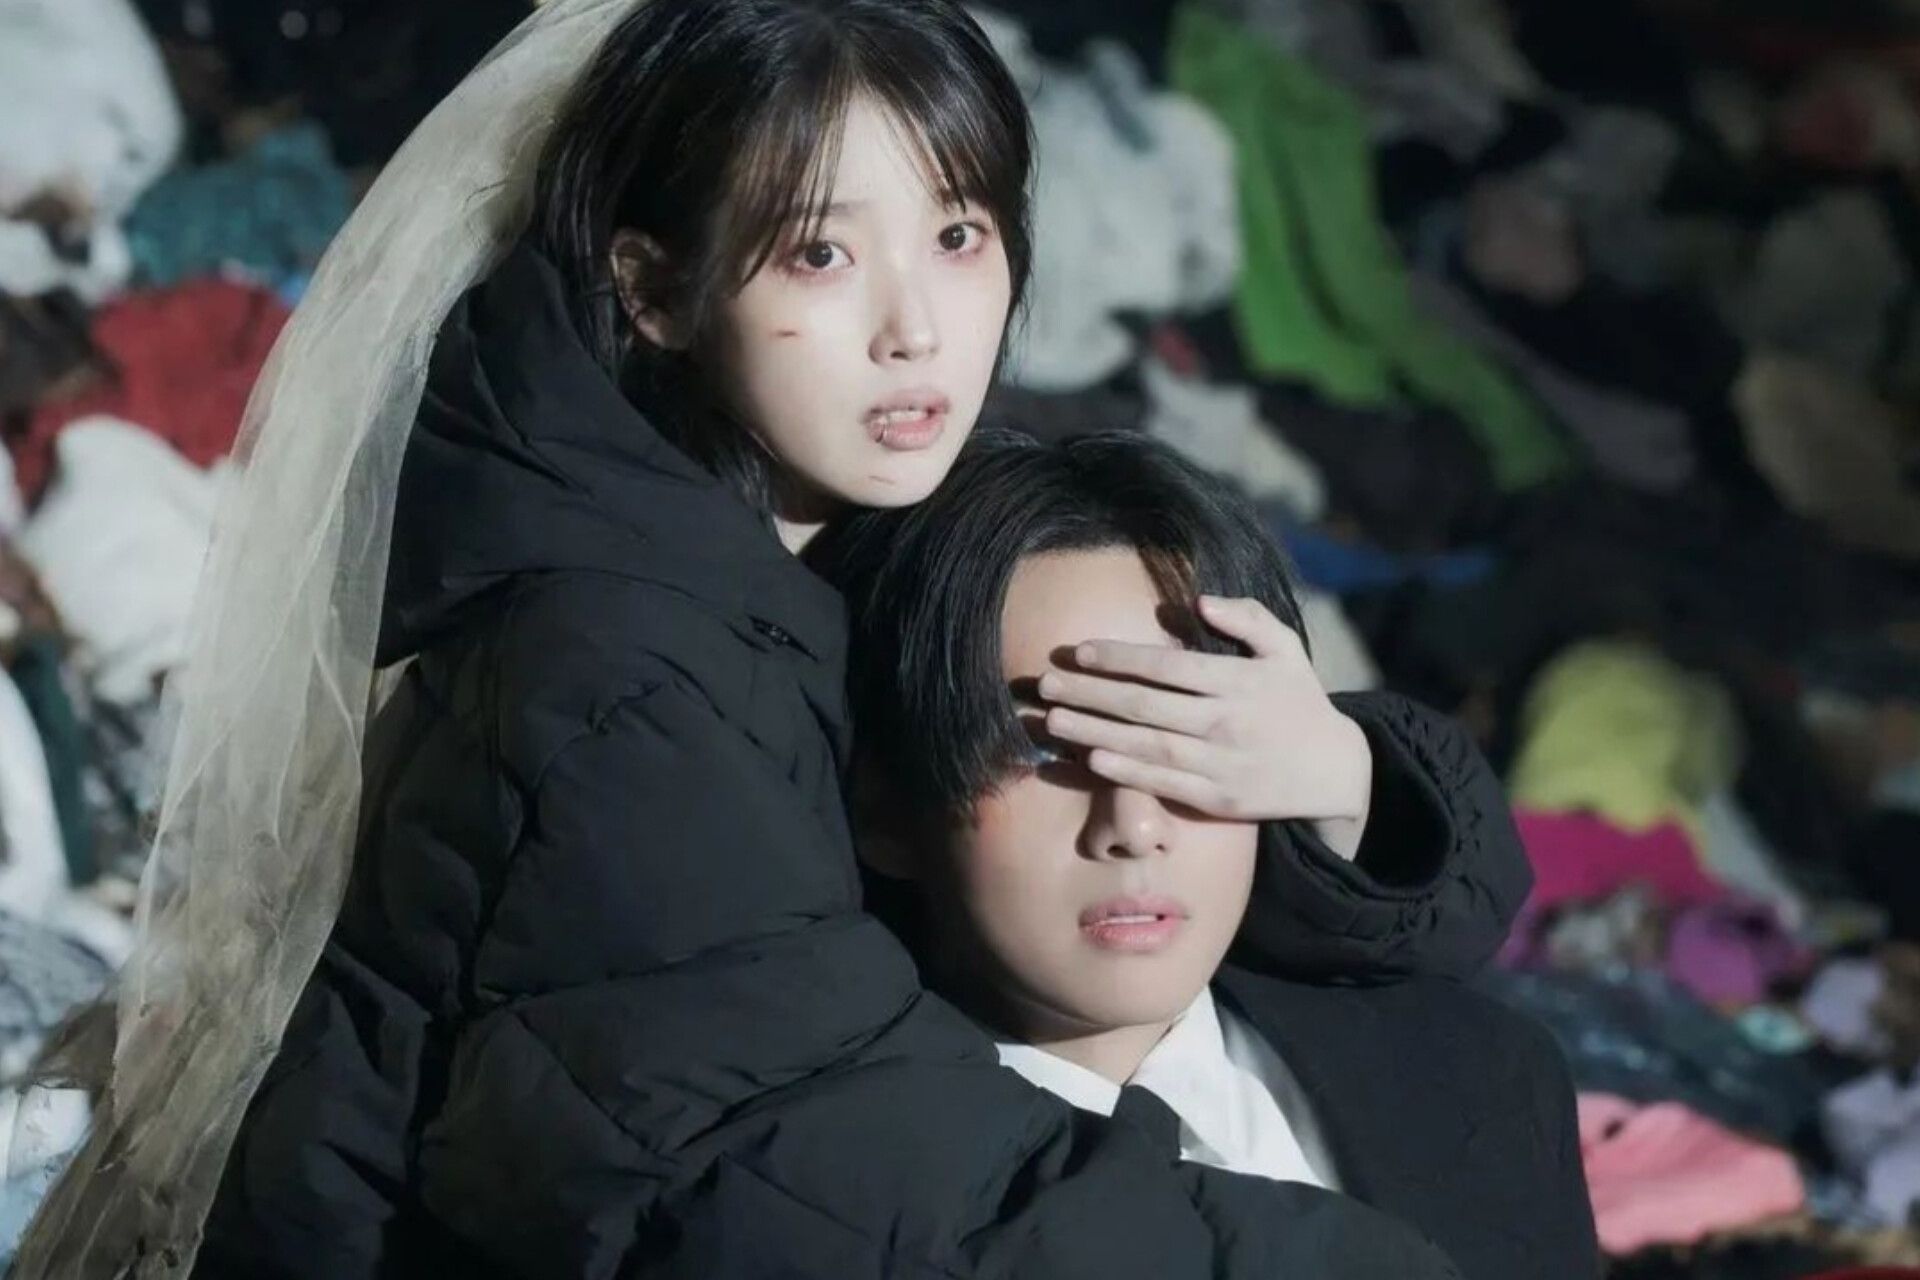 Link Download MP3 Lagu Love Wins All by IU, Sesangegeseo Domangchyeo Run On...